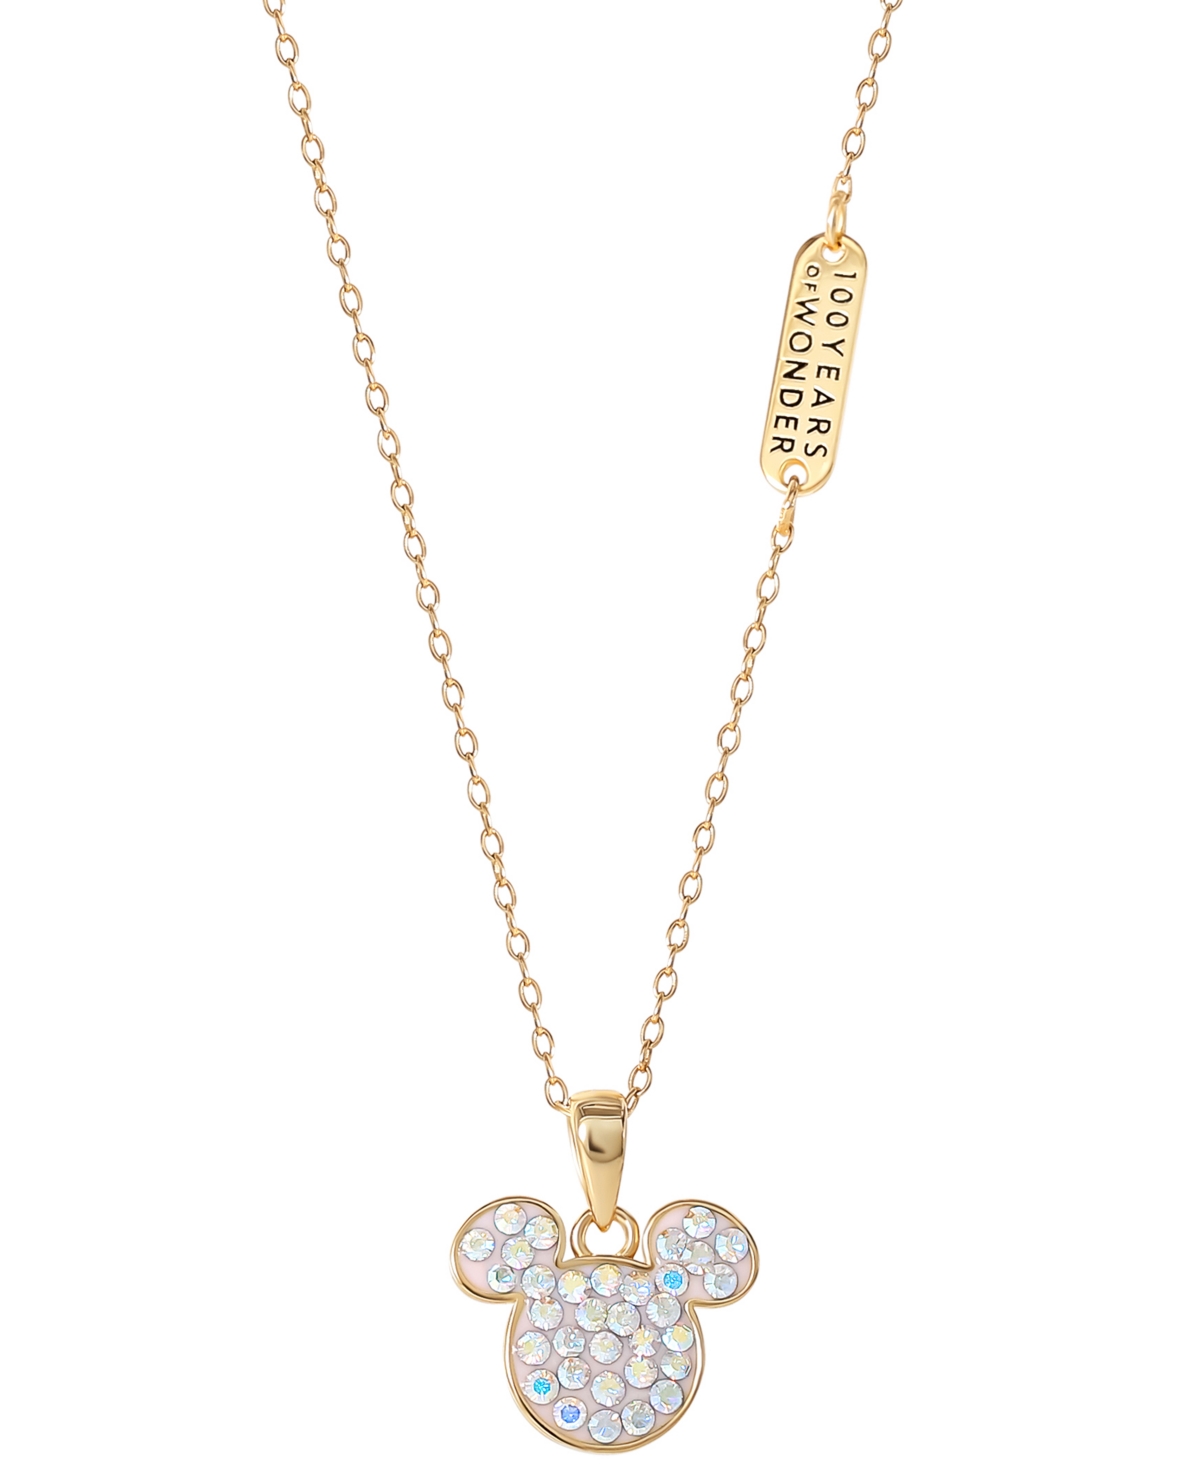 Disney Crystal Mickey Mouse Pendant Necklace In 18k Gold-plated Sterling Silver, 18" + 2" Extender In Gold Over Silver